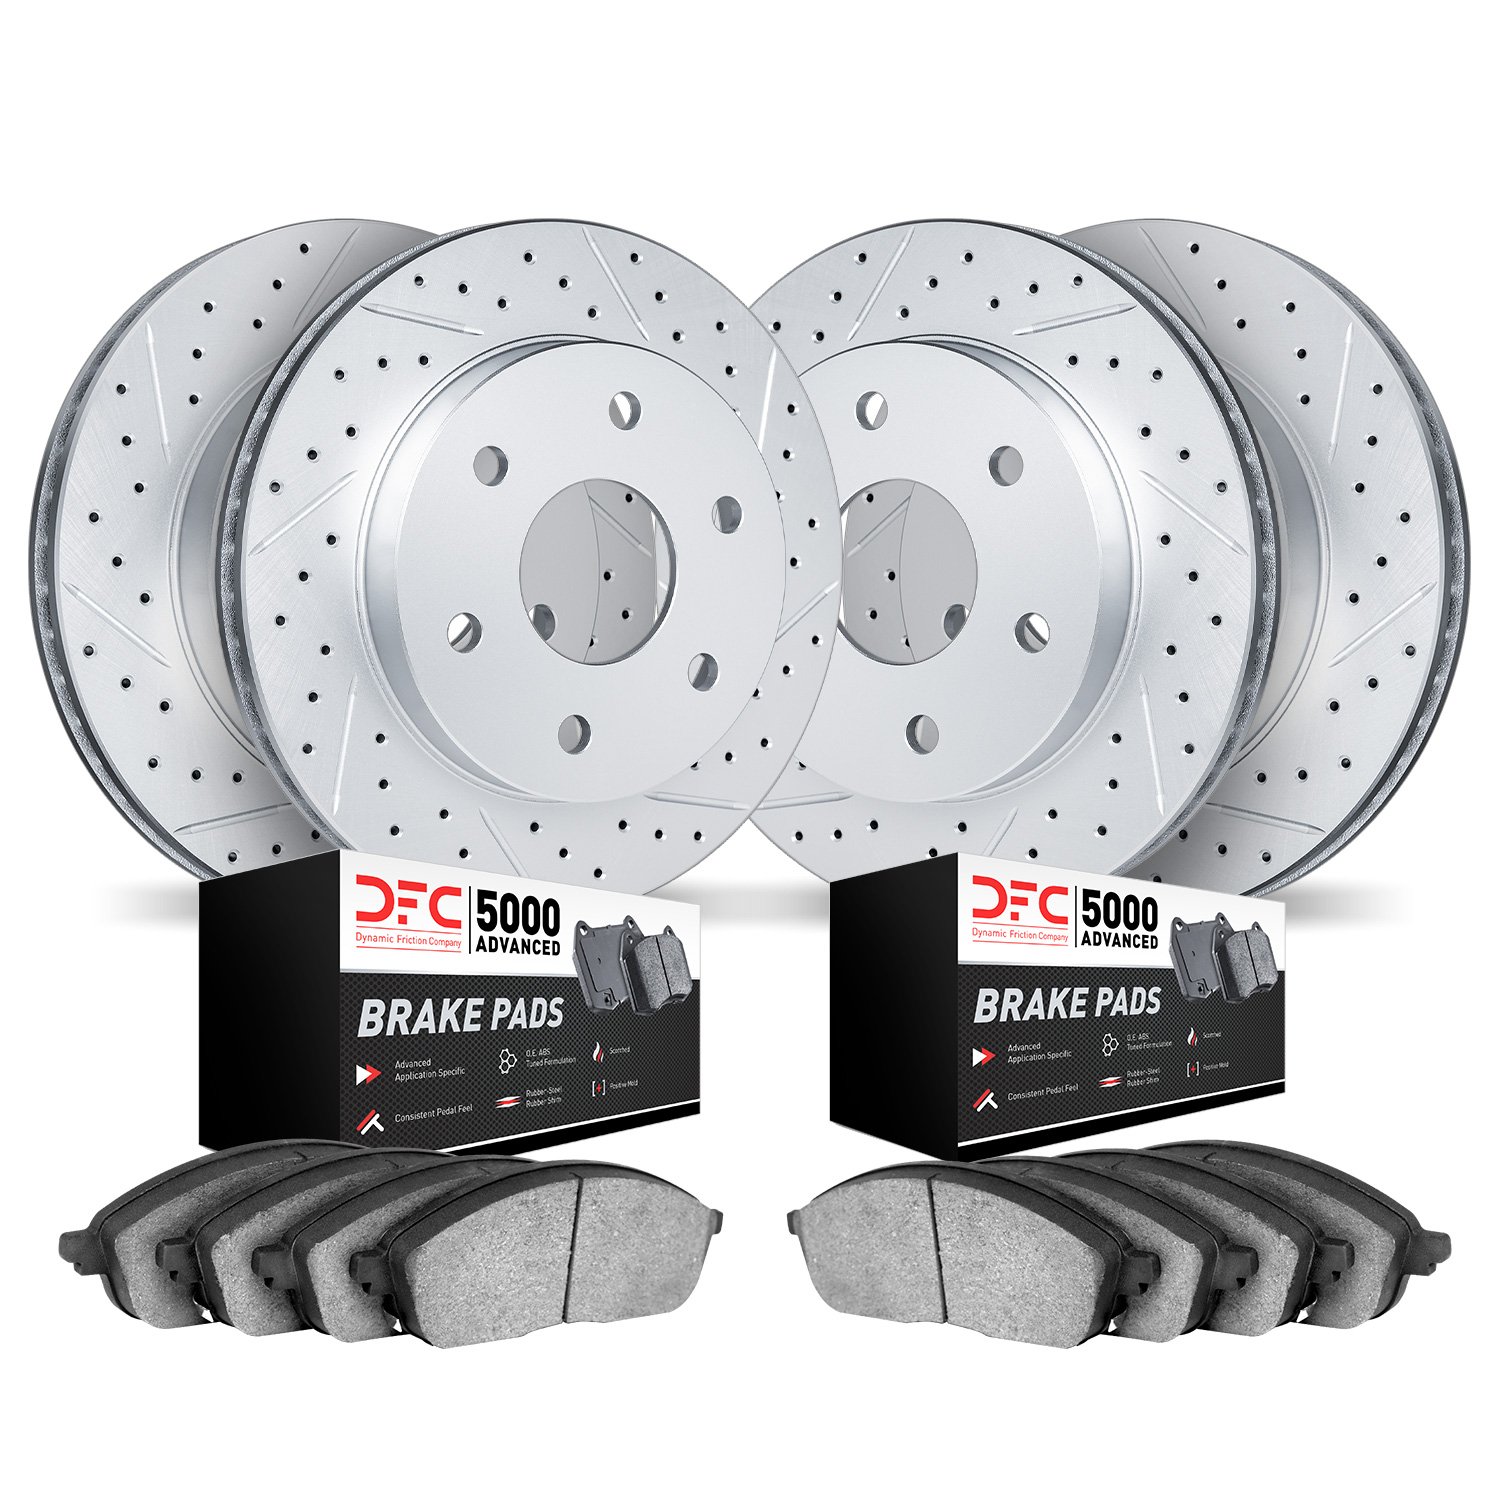 2504-54268 Geoperformance Drilled/Slotted Rotors w/5000 Advanced Brake Pads Kit, 2009-2009 Ford/Lincoln/Mercury/Mazda, Position: